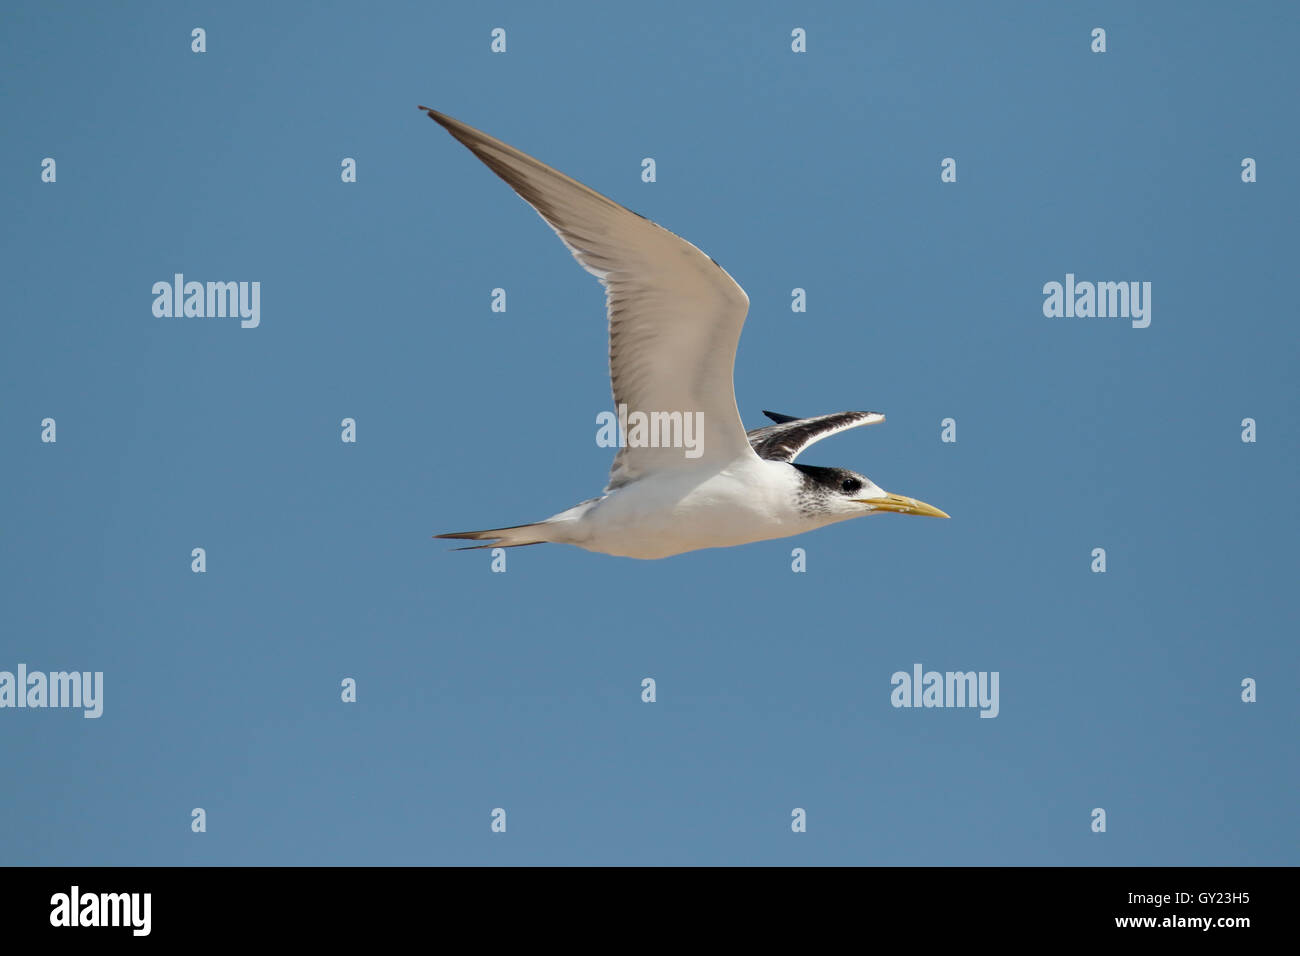 Greater-crested tern, Thalasseus bergii, single bird in flight, South Africa, August 2016 Stock Photo